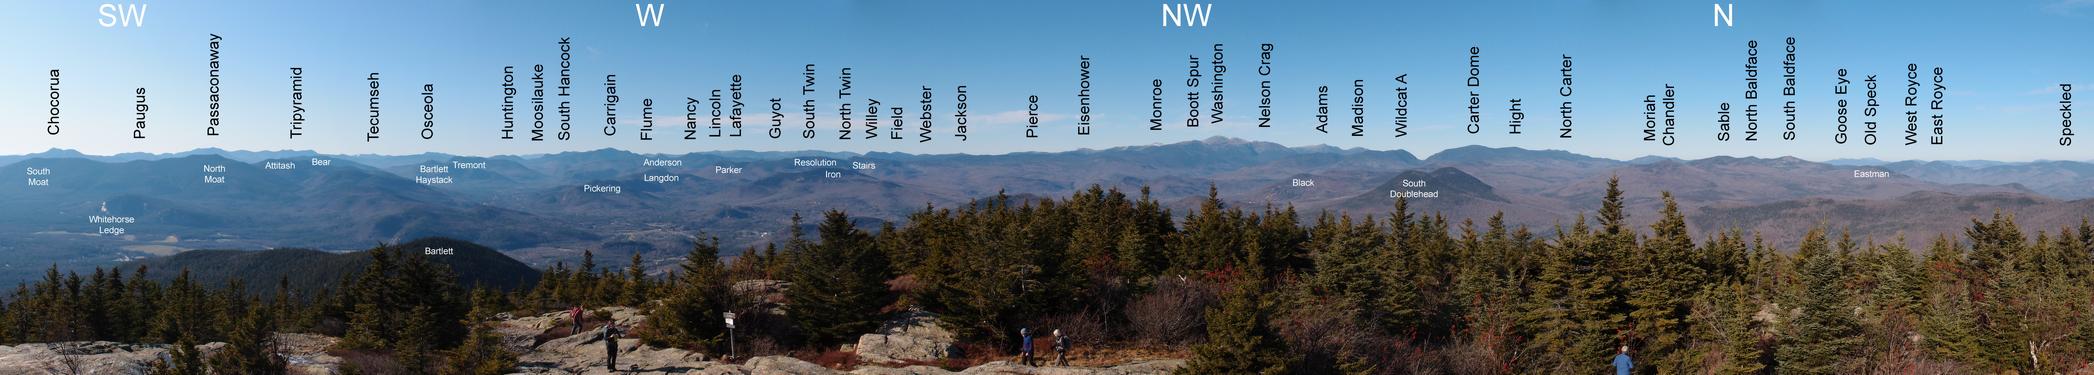 A view of the White Mountains as seen from the summit of Kearsarge North Mountain in NH in early December 201